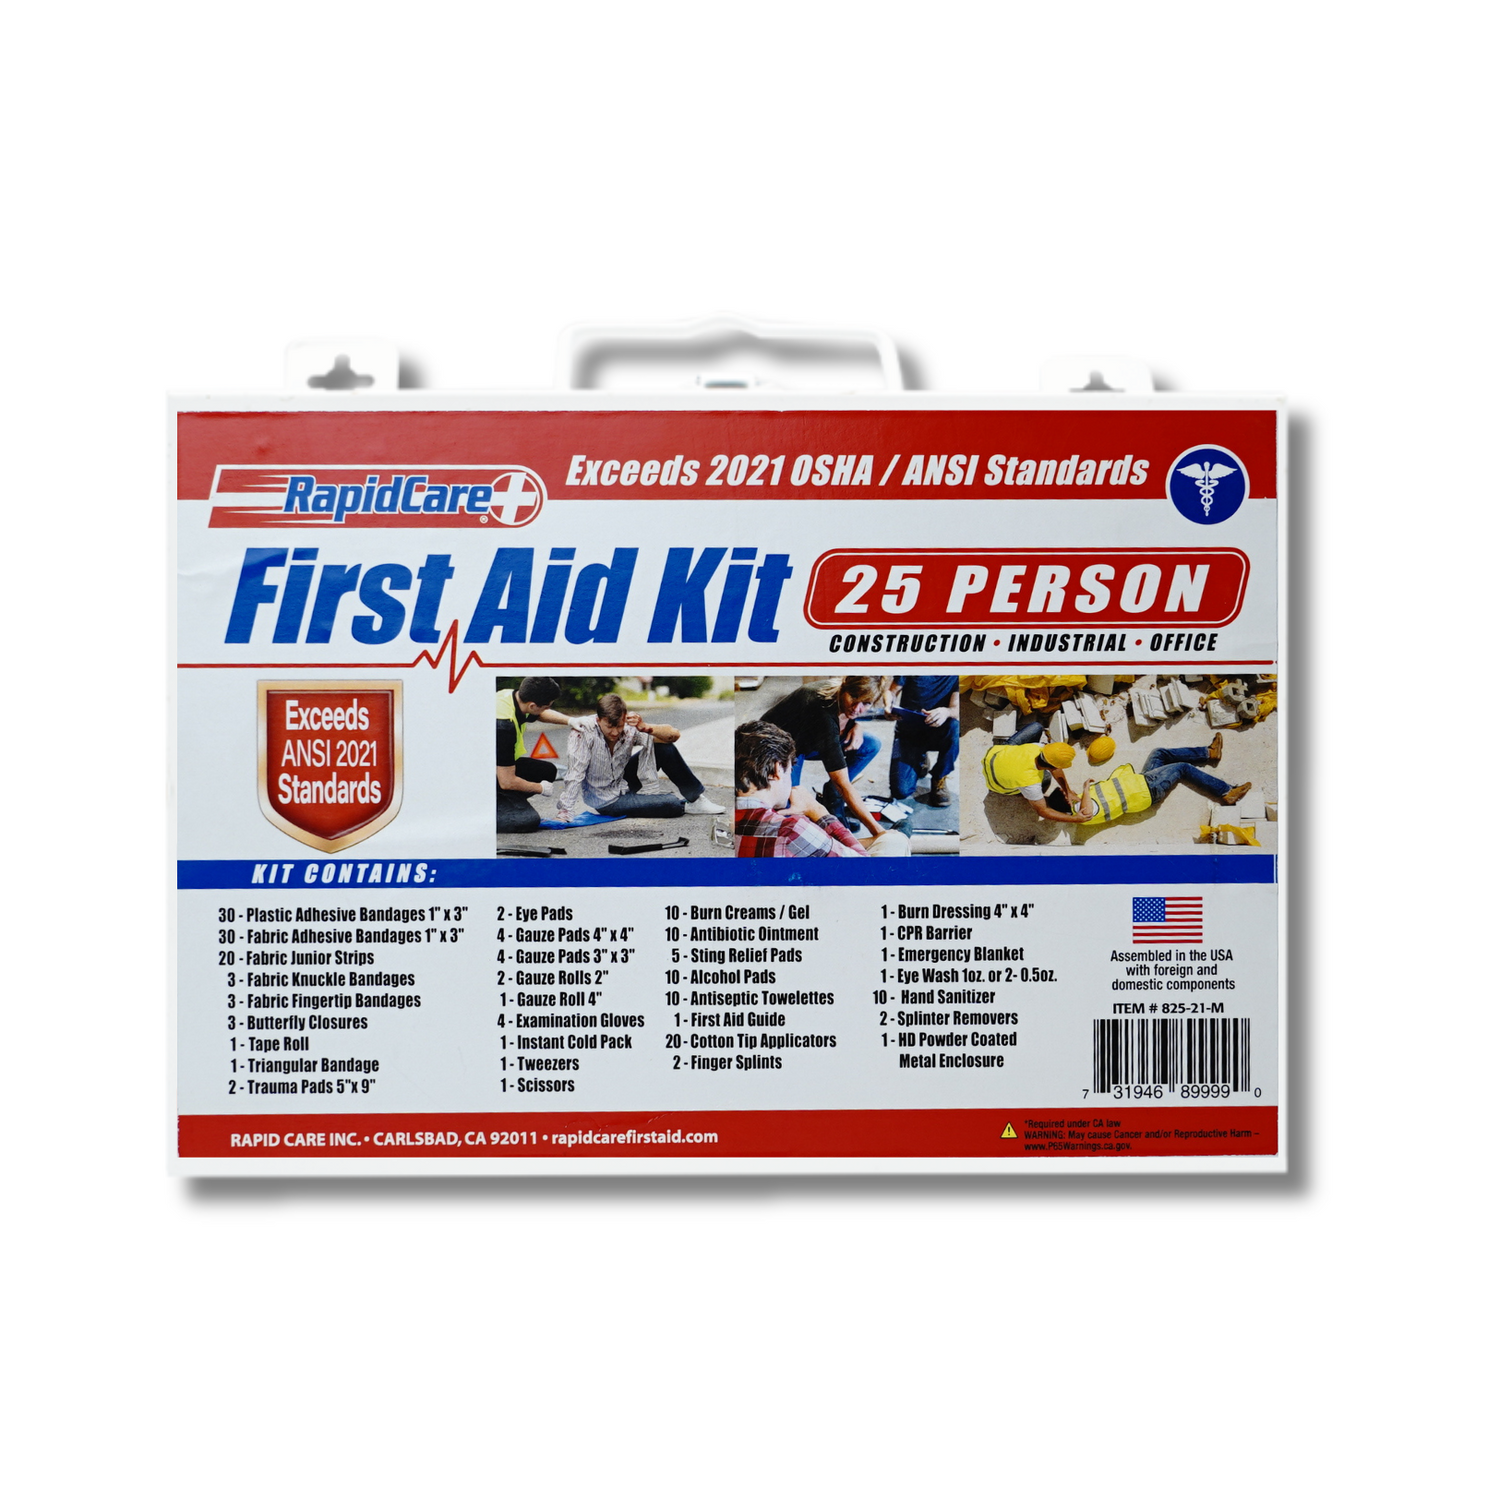 The Importance of a Comprehensive First Aid Kit